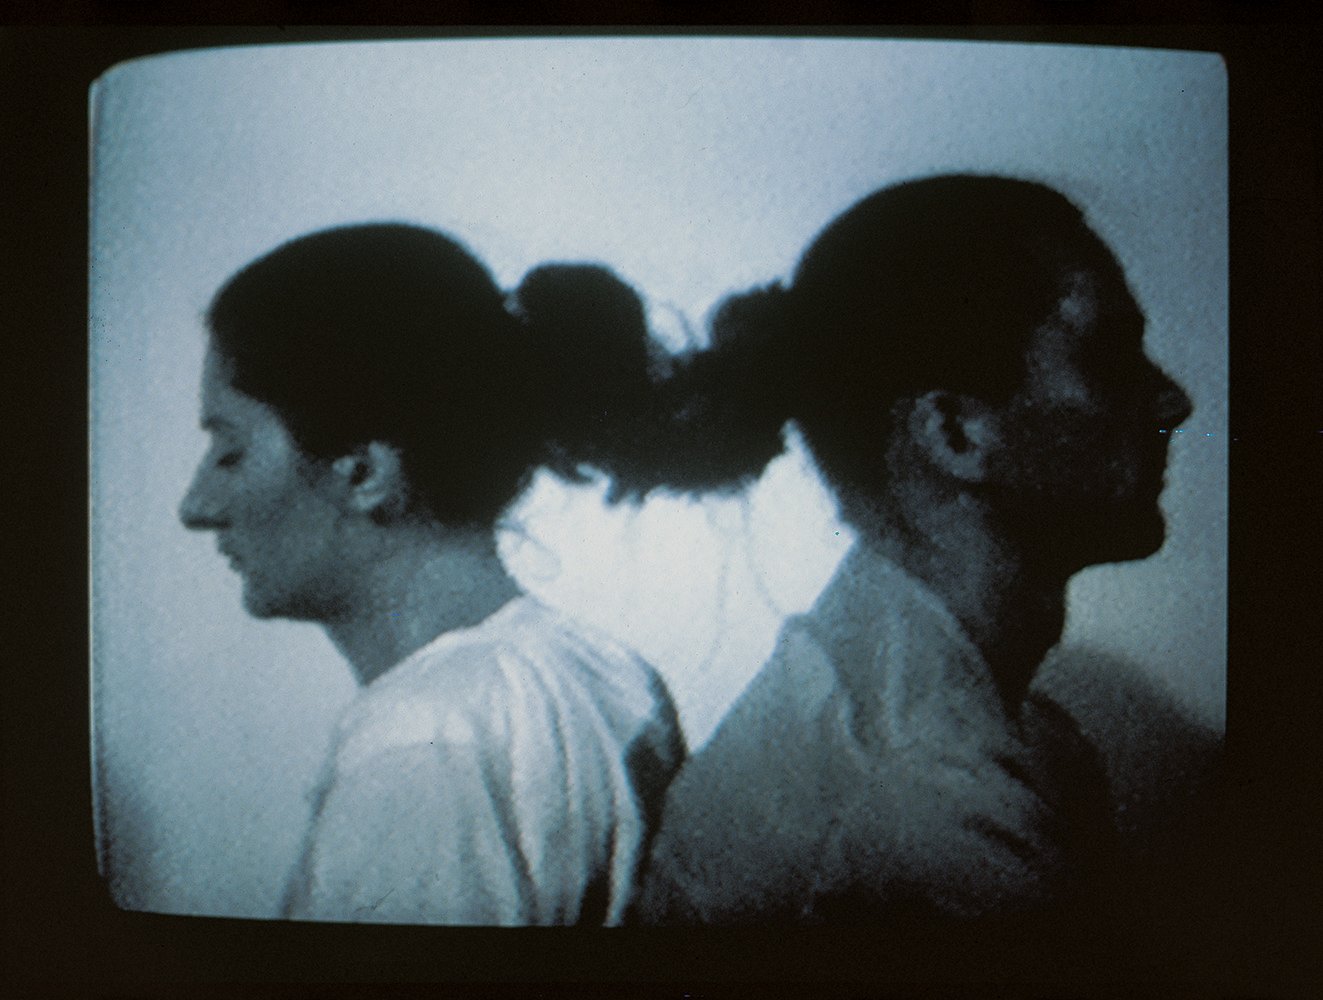 Image: Marina Abramović and Ulay, Relation in Time, 1977-1999 Collection macLYON © Adagp, Paris, 2021